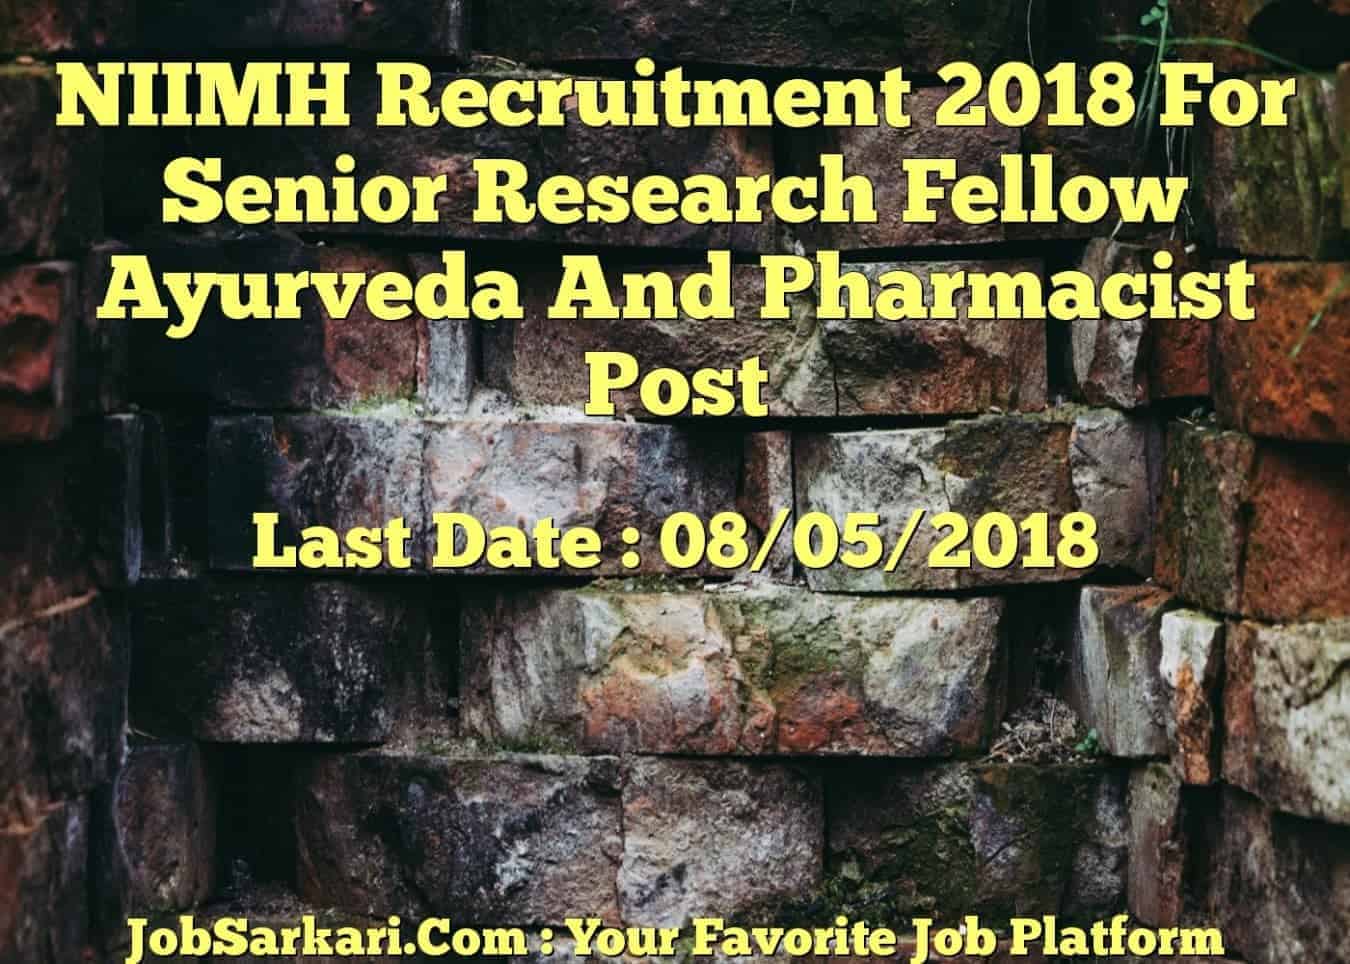 NIIMH Recruitment 2018 For Senior Research Fellow Ayurveda And Pharmacist Post